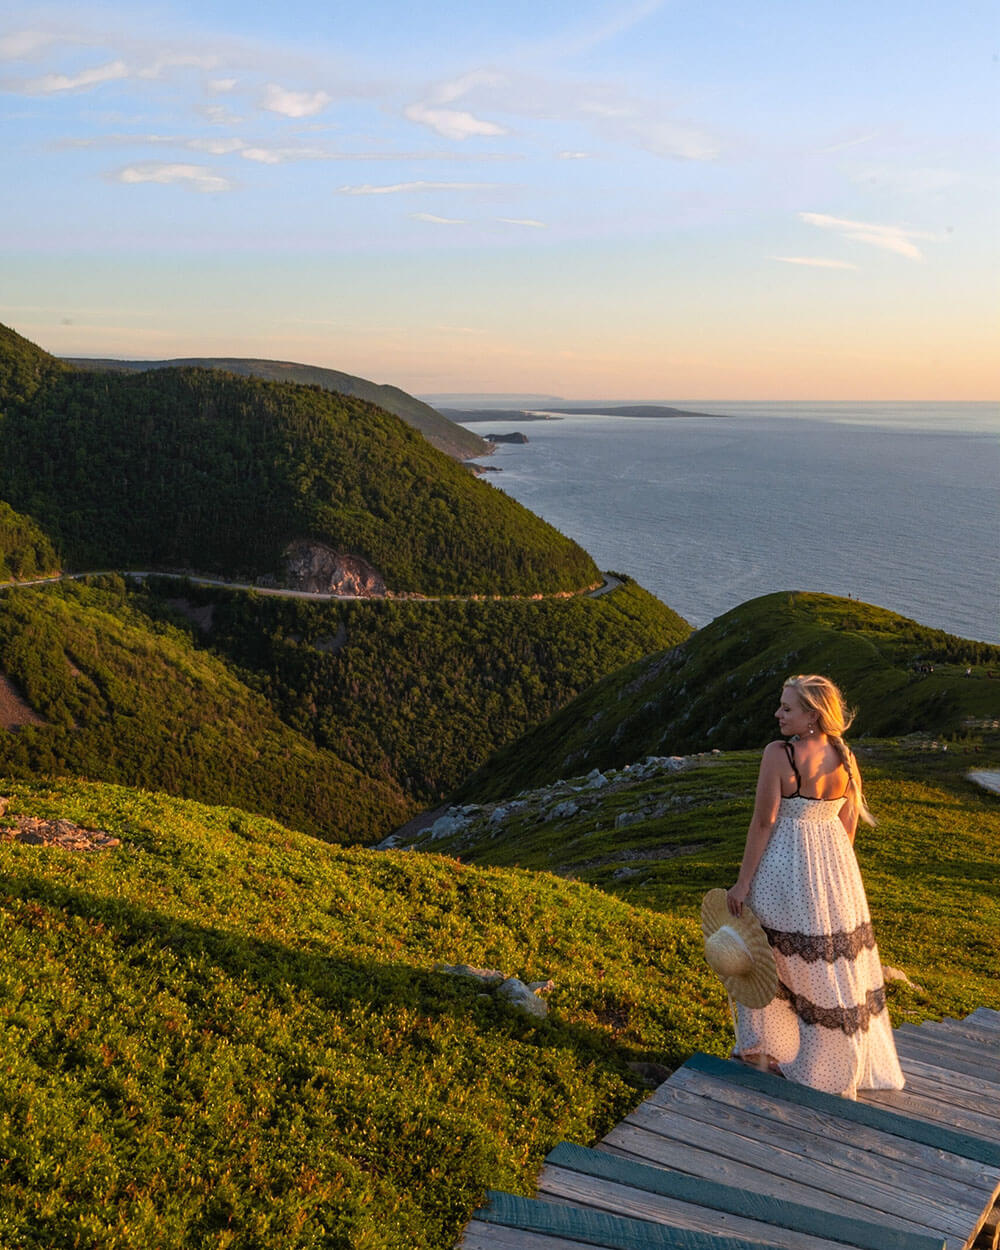 Planning a trip to Cape Breton soon? This guide includes all of the best things to do in Cape Breton Island! From activities and attractions, to the top restaurants, hikes, and all the things you'll want to see along the famous Cabot Trial. You won't want to miss this guide that will help you plan the perfect getaway to Cape Breton. Click for the full list. Pictured here: The Skyline Trail